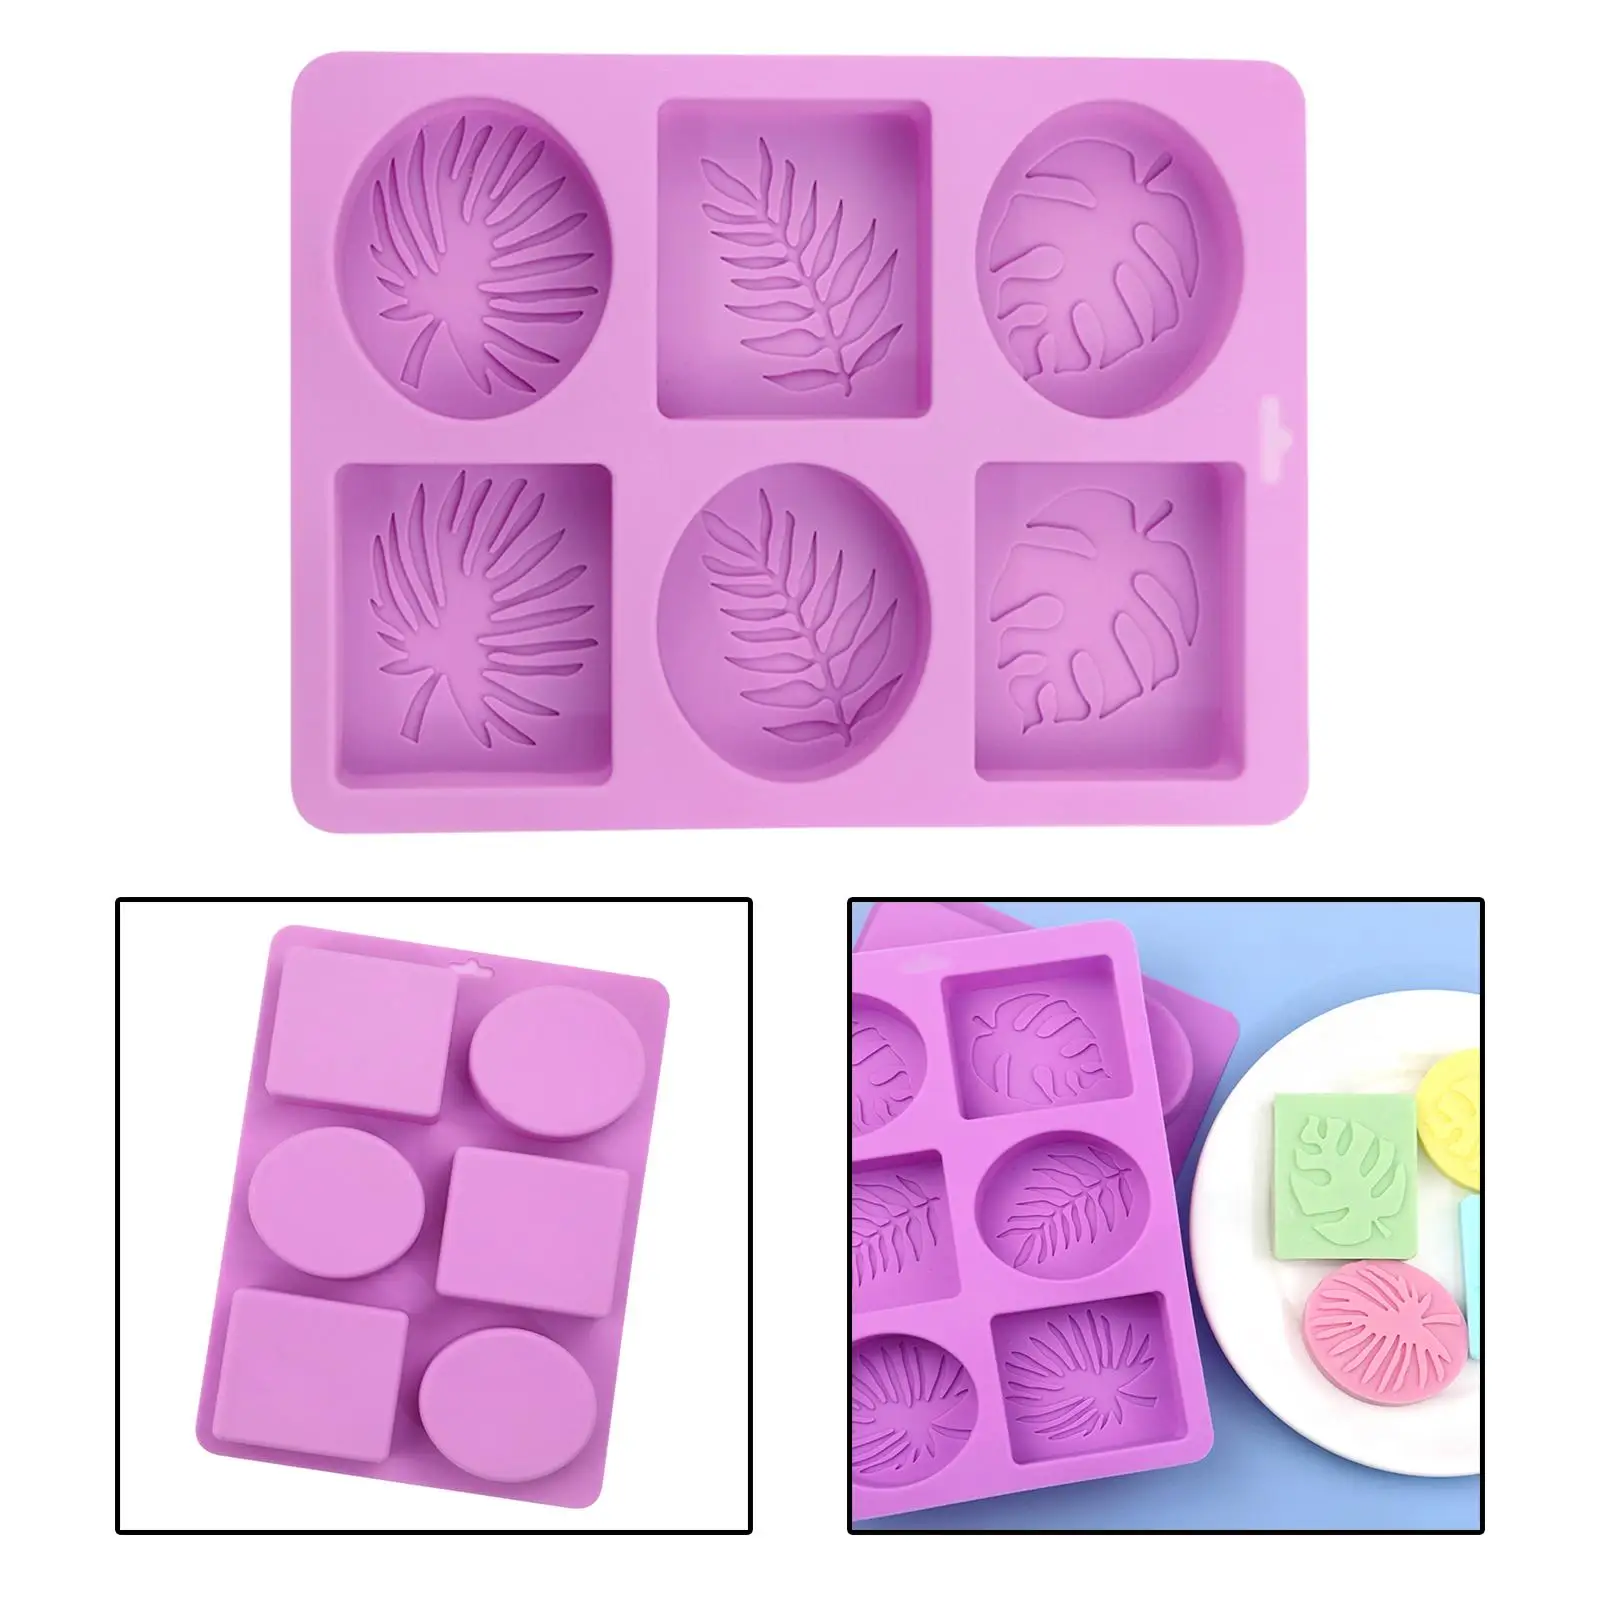 Silicone Soap Molds Handmade Soap Molds 6 Cavities Nonstick Rectangle & Oval for Cake Baking Pudding Soap Making Biscuit Muffin